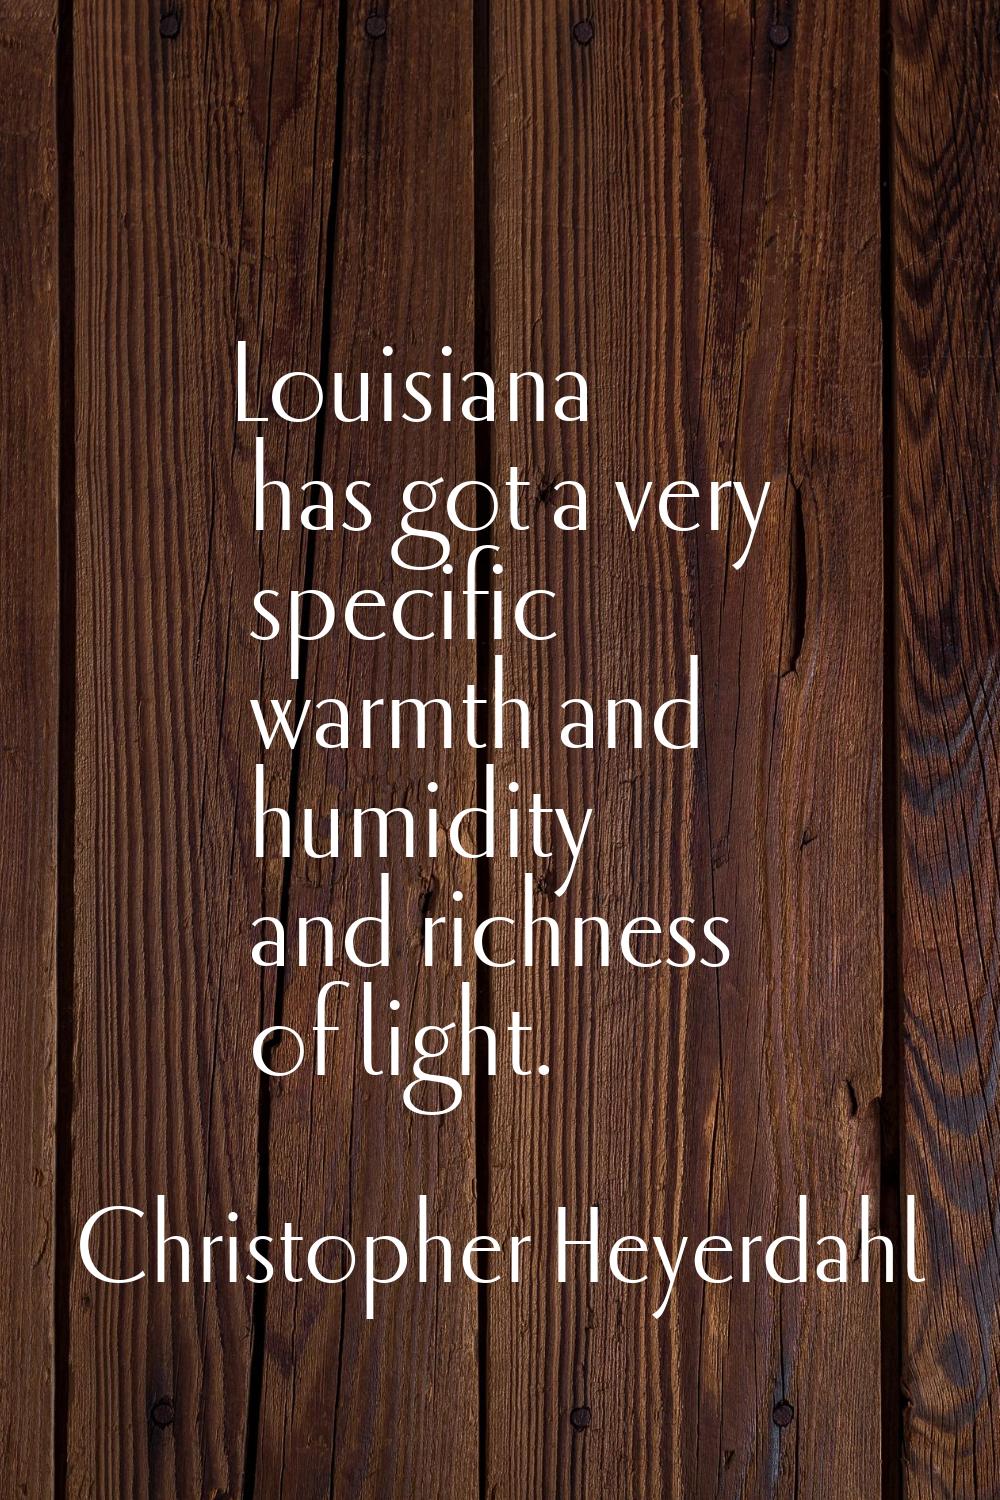 Louisiana has got a very specific warmth and humidity and richness of light.